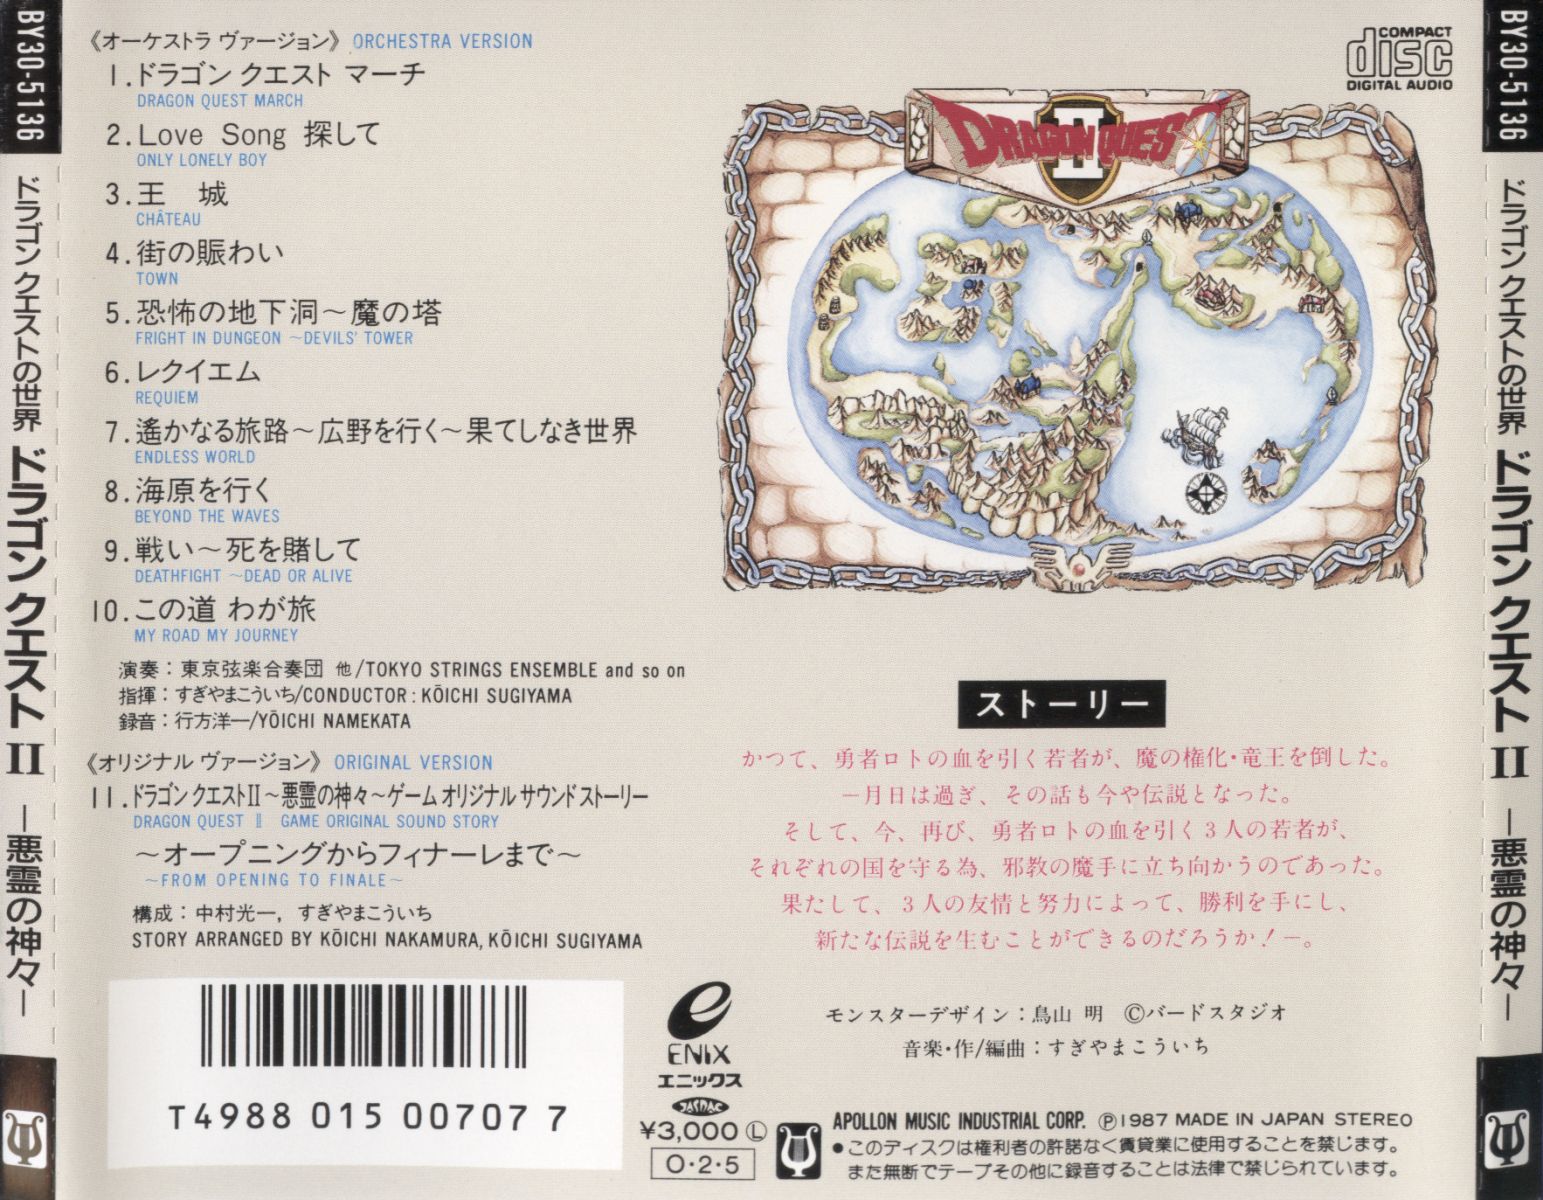 Dragon Quest II - Suite - Gods of the Evil Spirits Back Cover.jpg